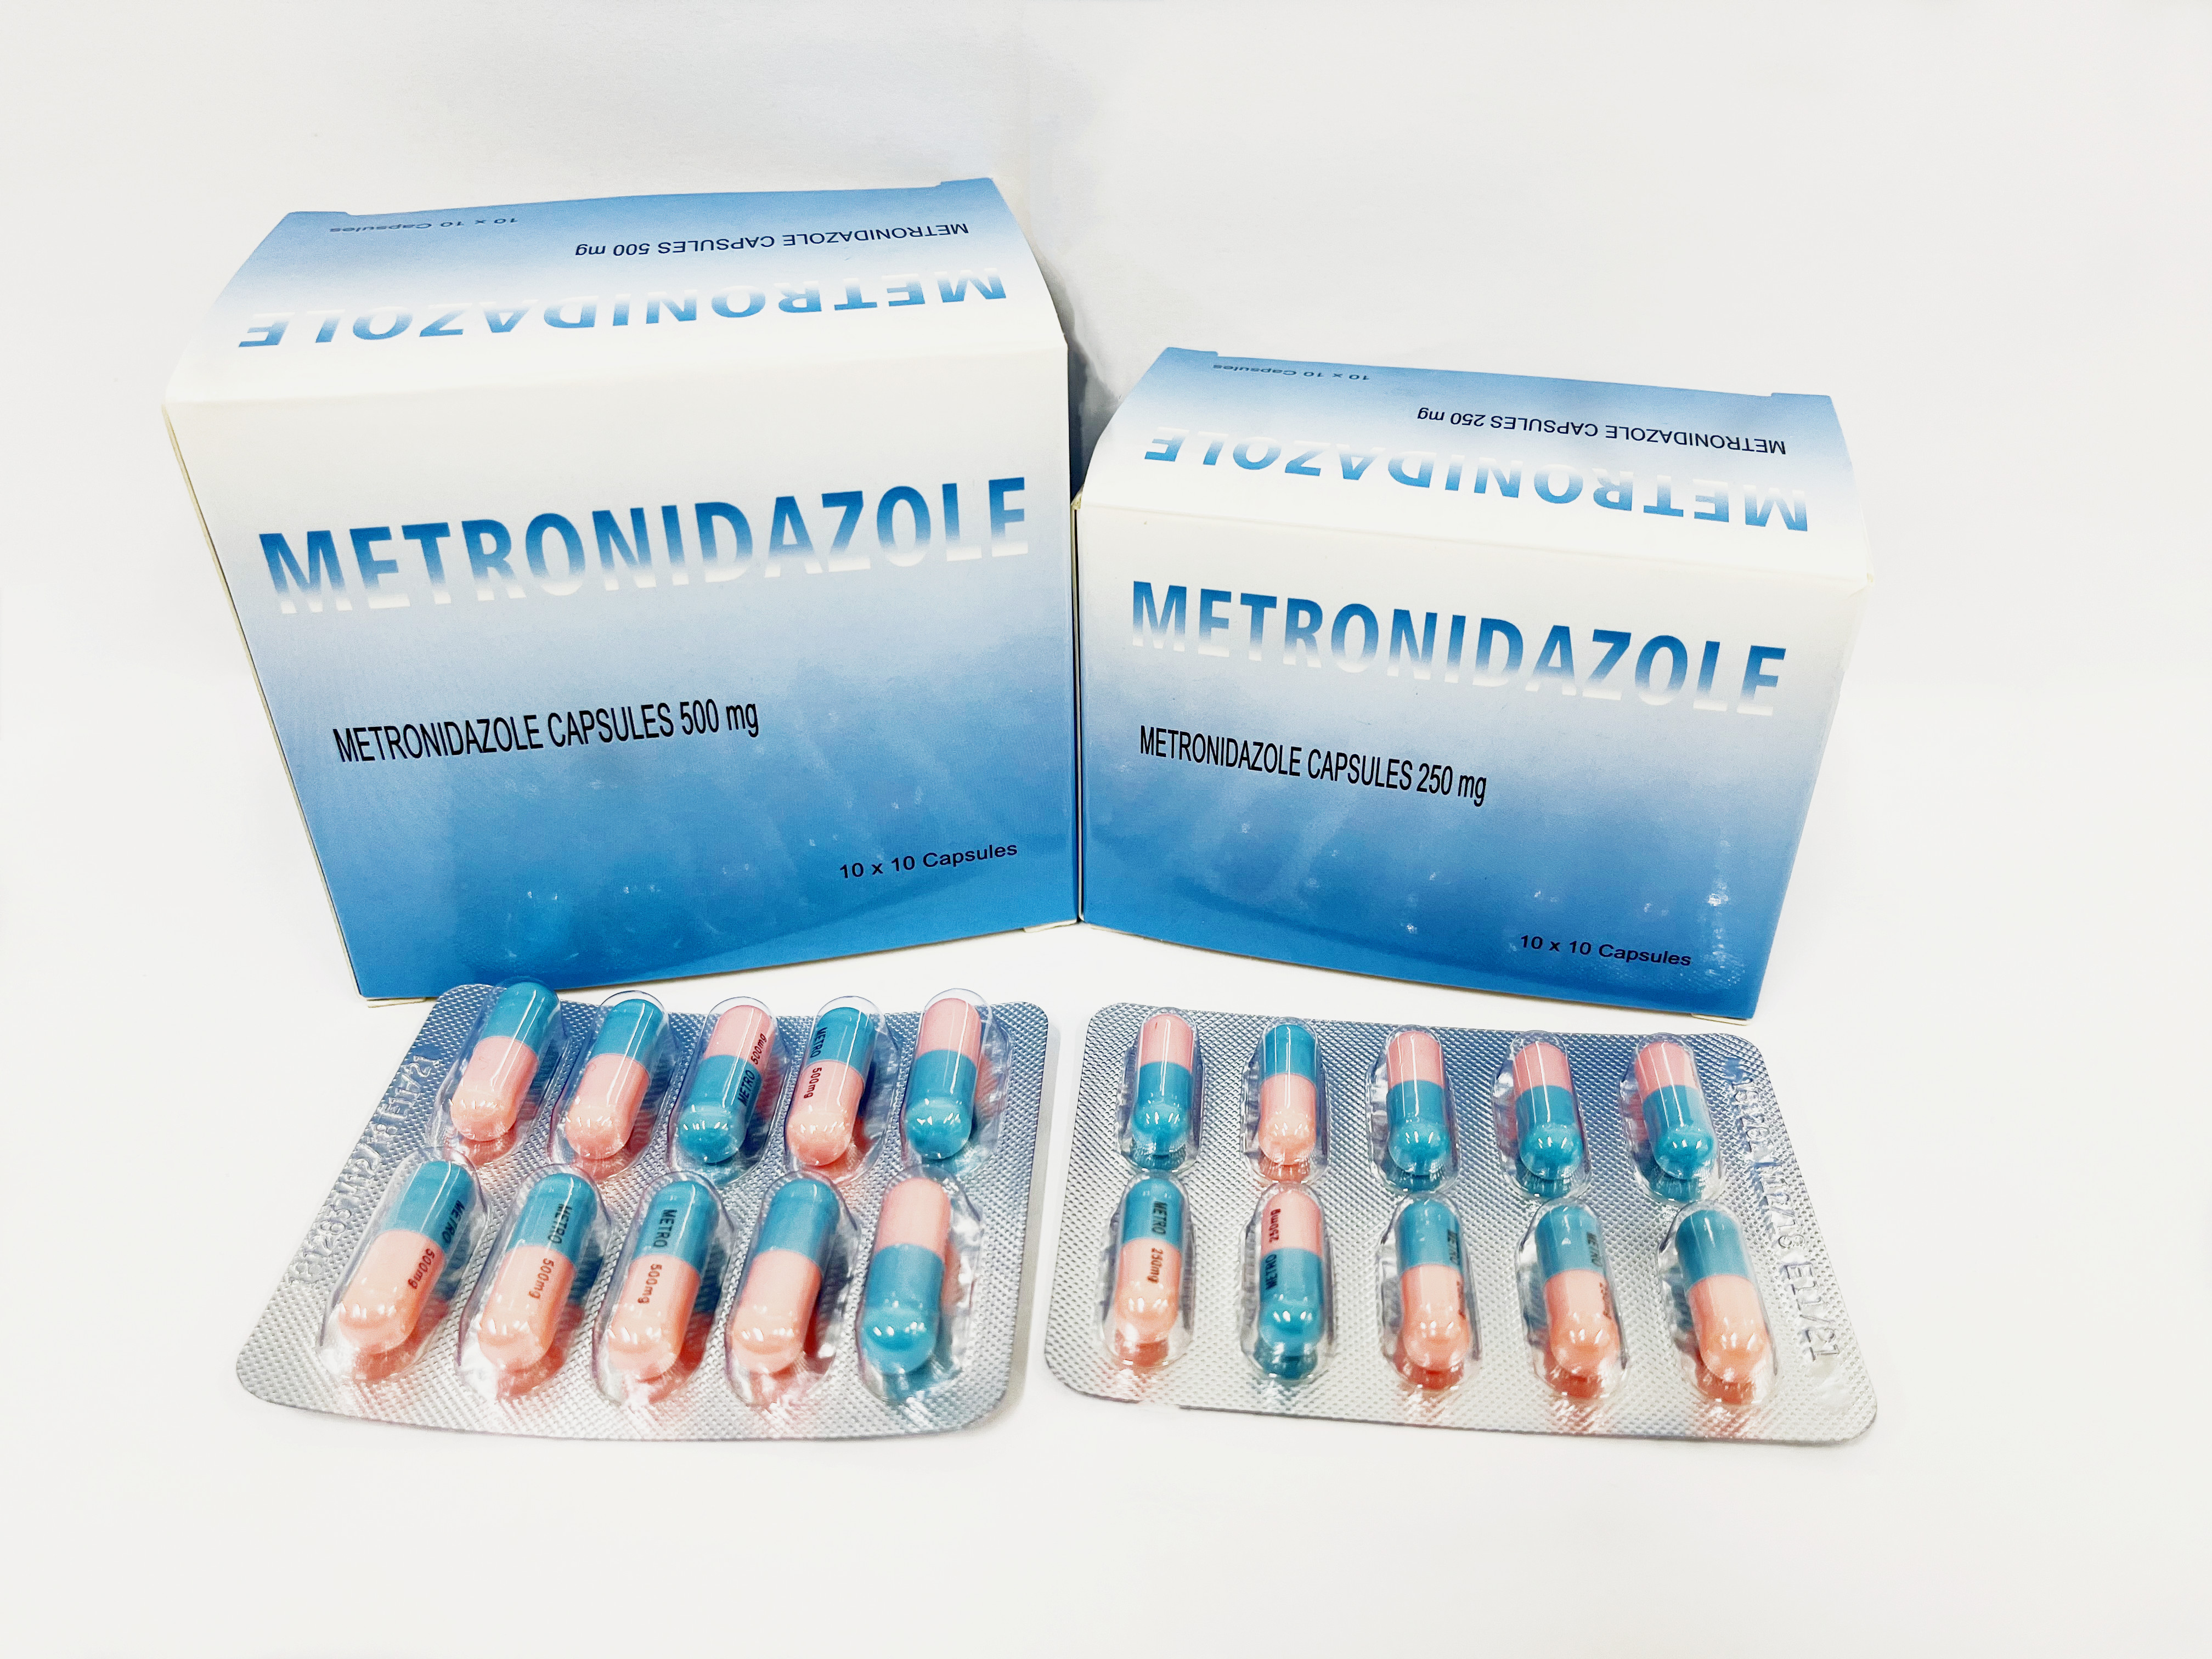 Metronidazole Capsules 250mg/500mg Featured Image